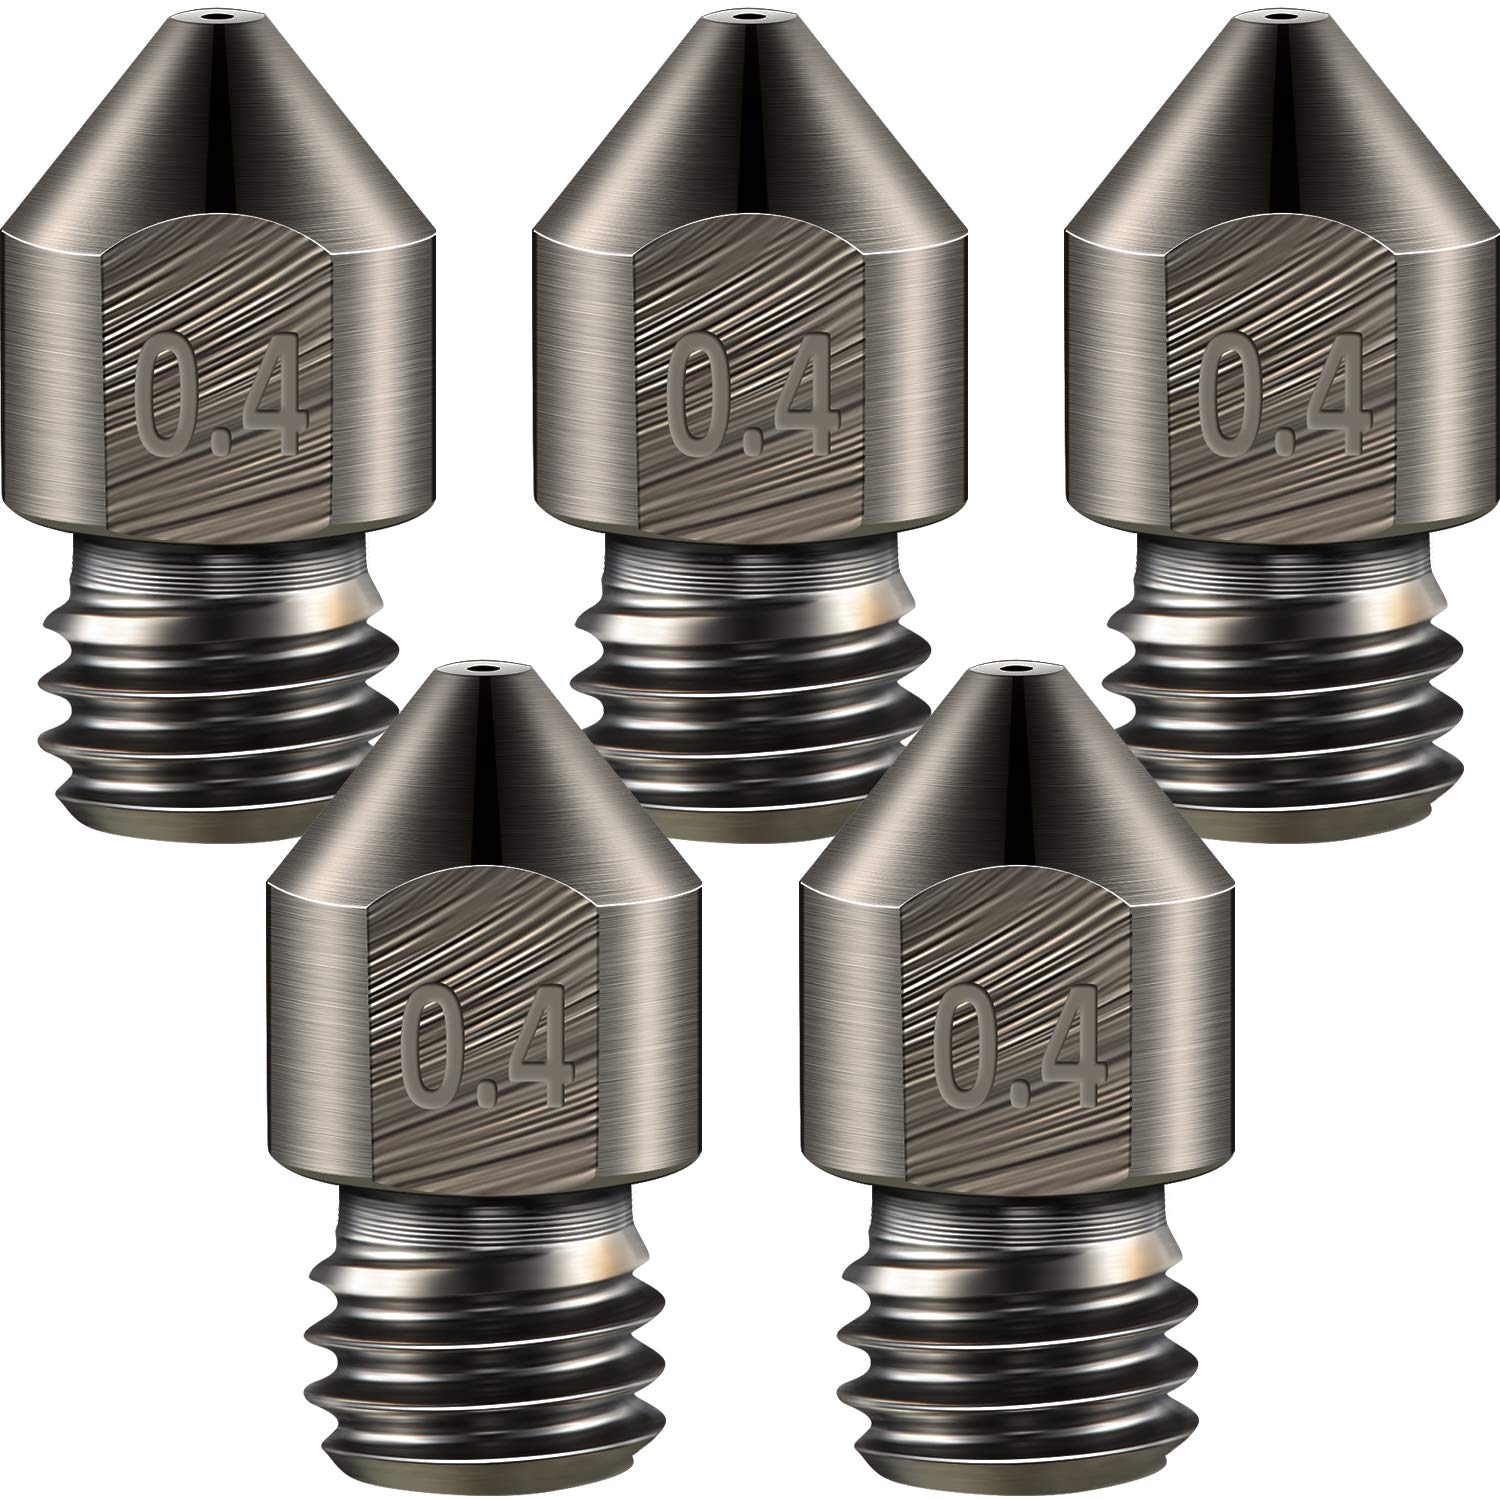 Hardened Steel Nozzle by Mudder Store